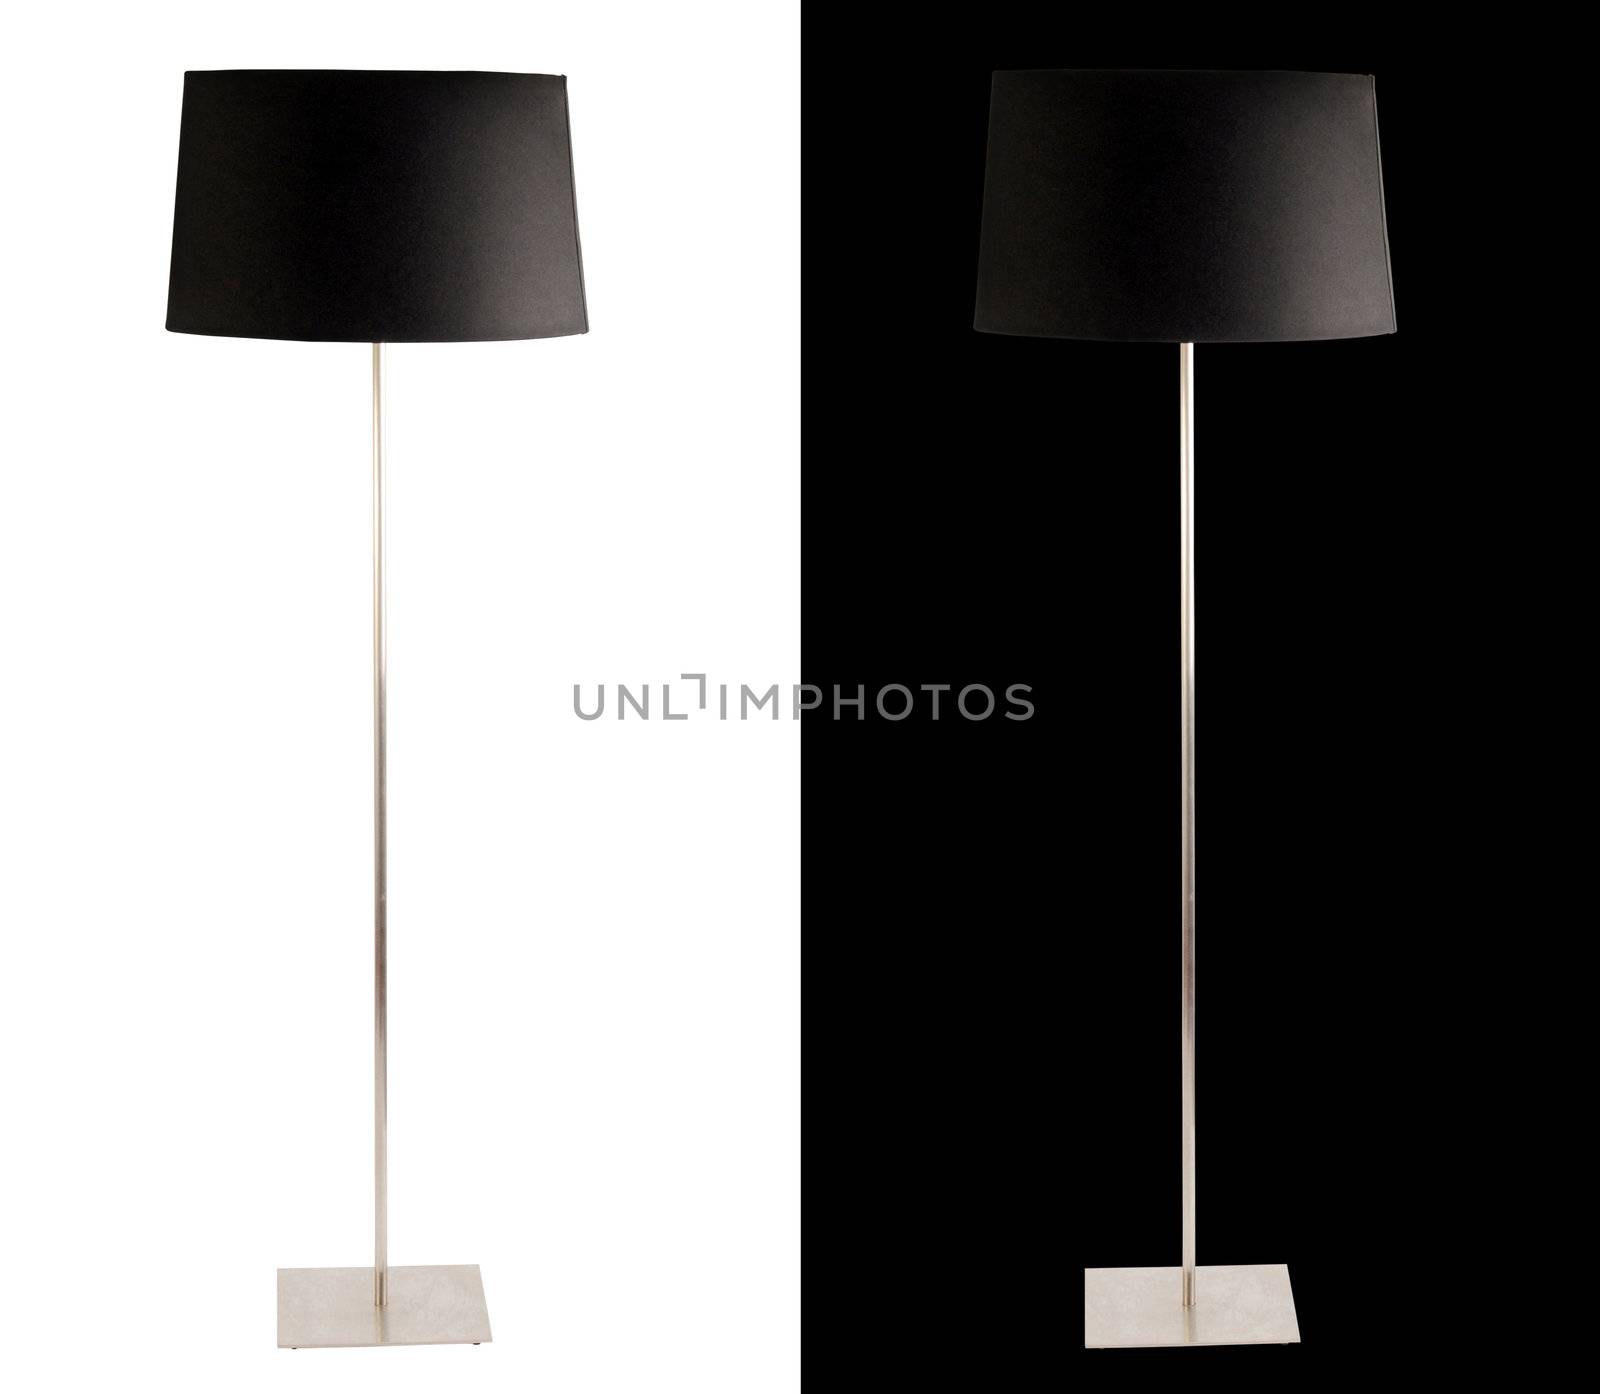 Contemporary metallic and black floor lamp on white and black backgrounds. Clipping path included for both, so you can easily cut it out and place over the top of a design.